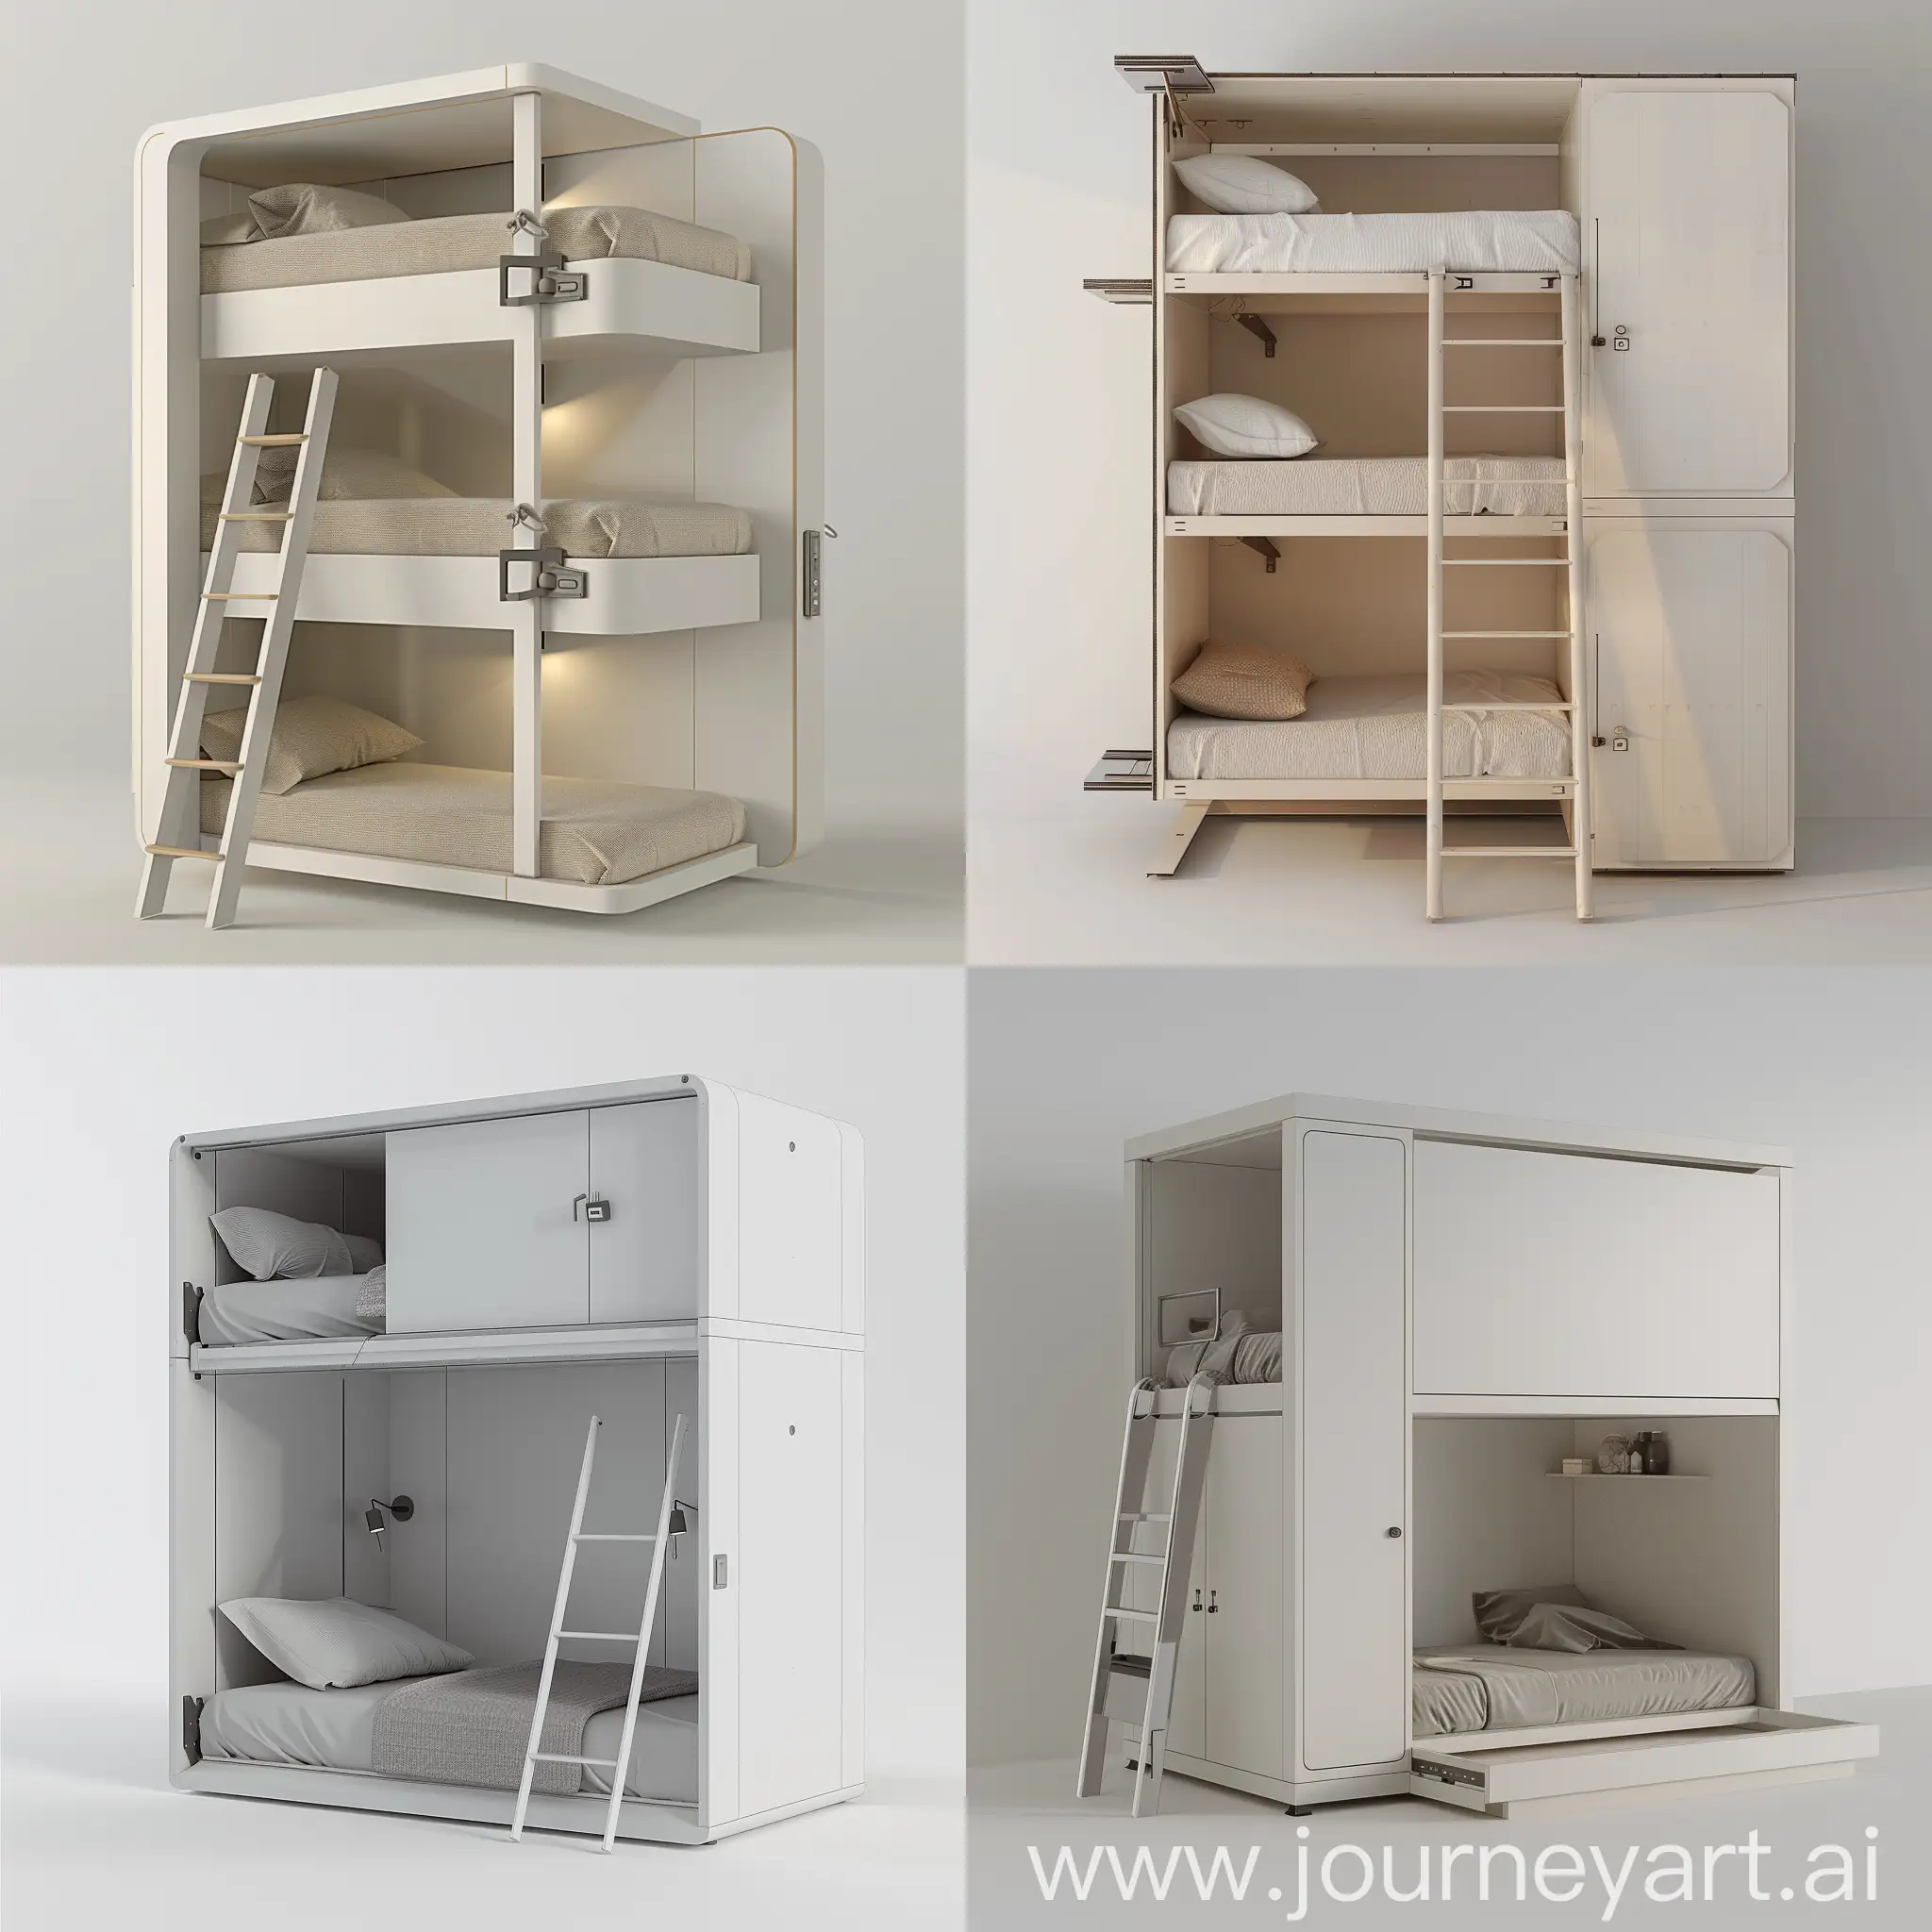 Modern-White-Wooden-Bunk-Bed-Unit-with-Closed-Door-and-Ladder